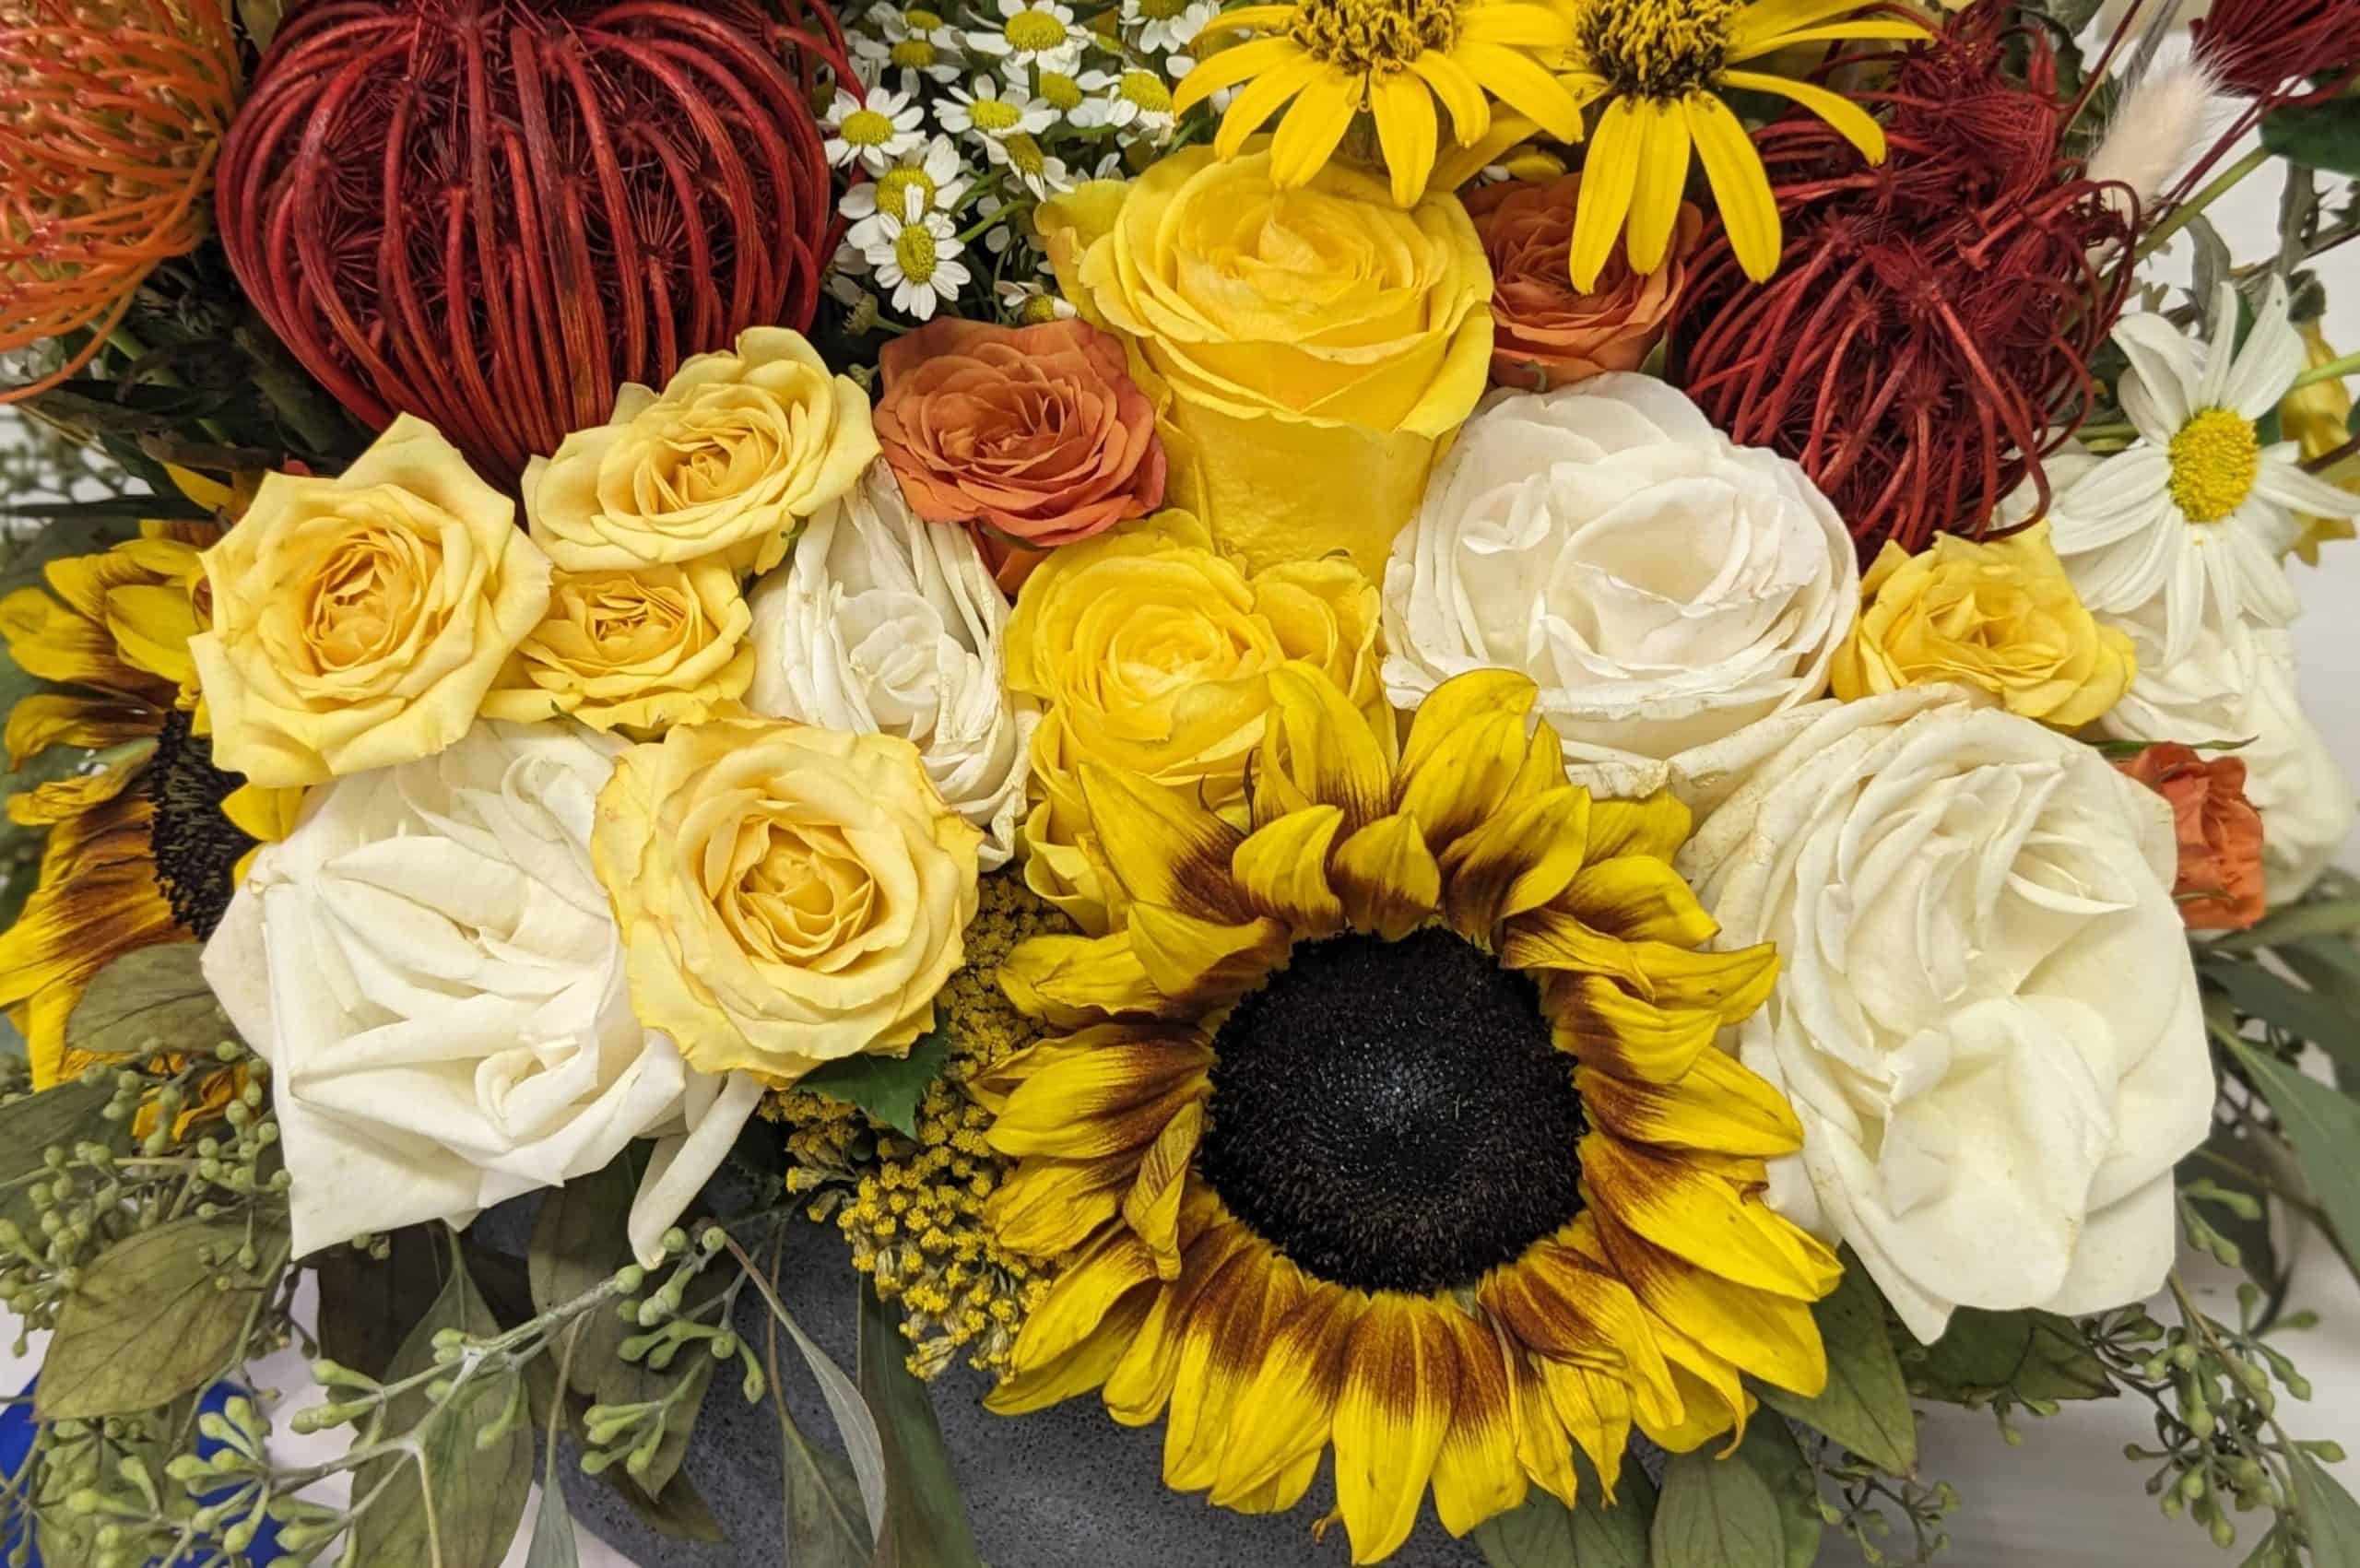 Flower arrangement with yellow, white, and orange roses and other yellow, white, and orange flowers